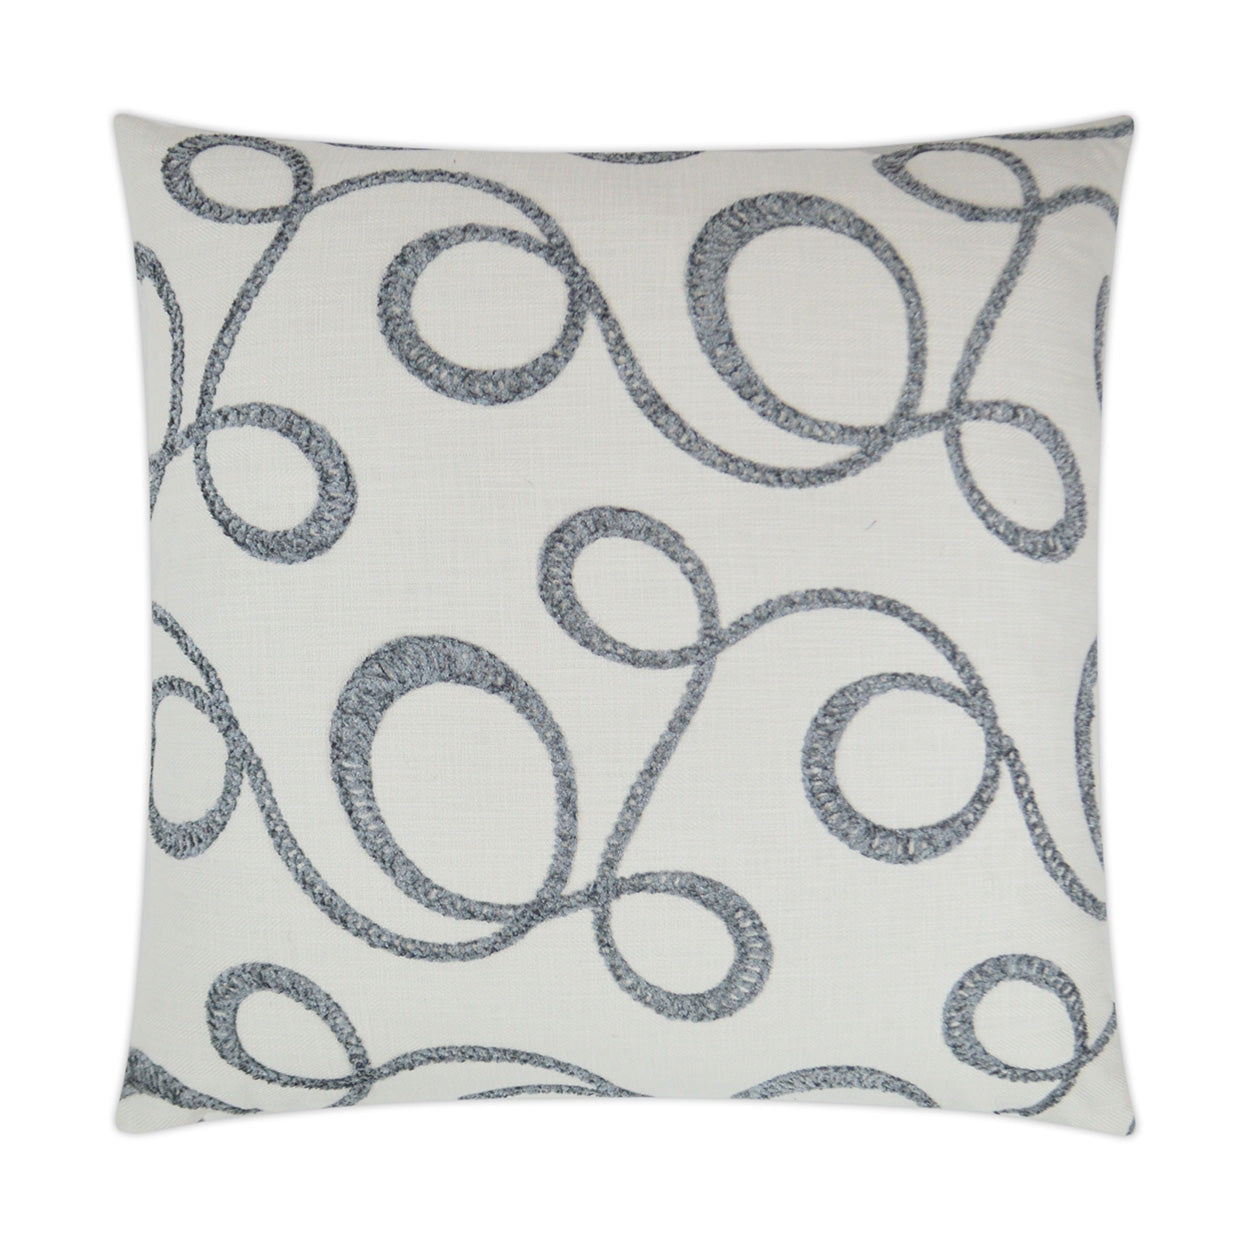 REDUCED TO CLEAR  Luxury Pillow - 24" x 24" - Okeefe-Slate; Textural embroidered pattern of slate gray over a cream background